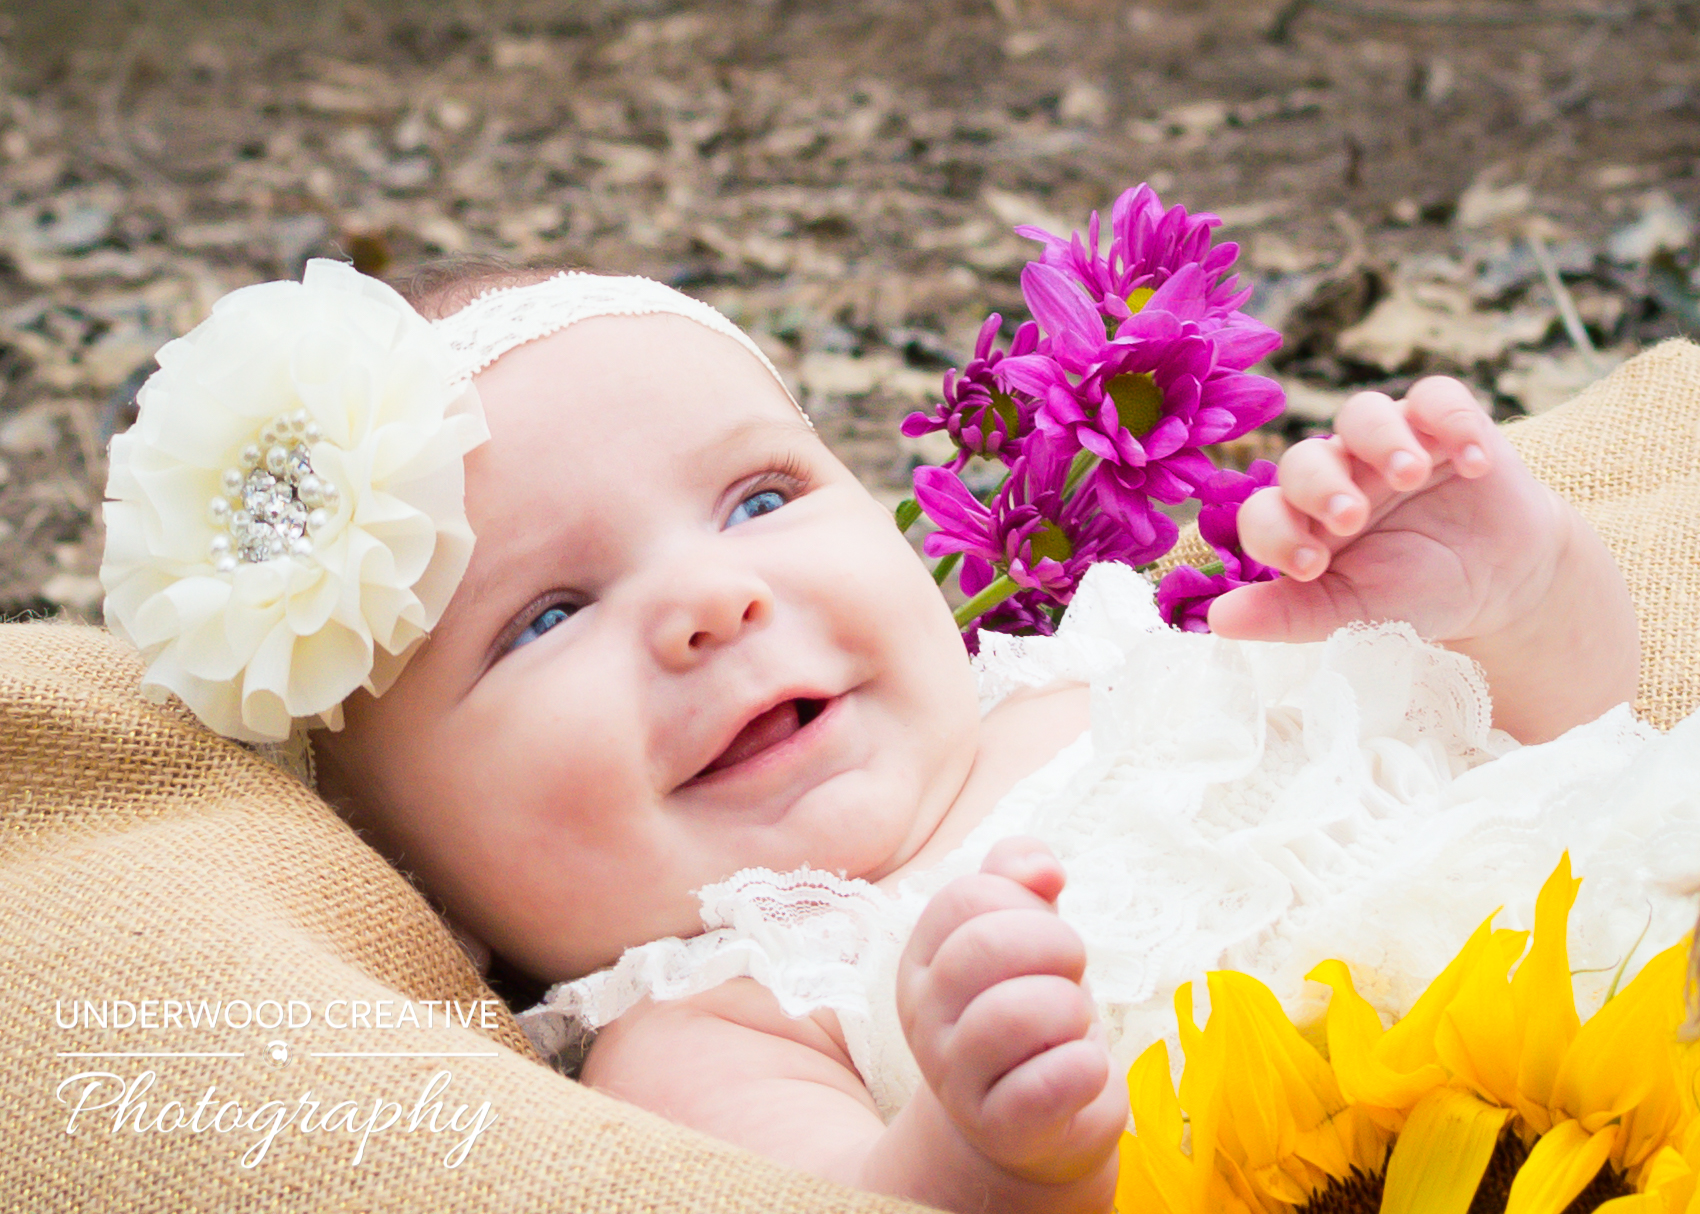 Baby with flowers portrait